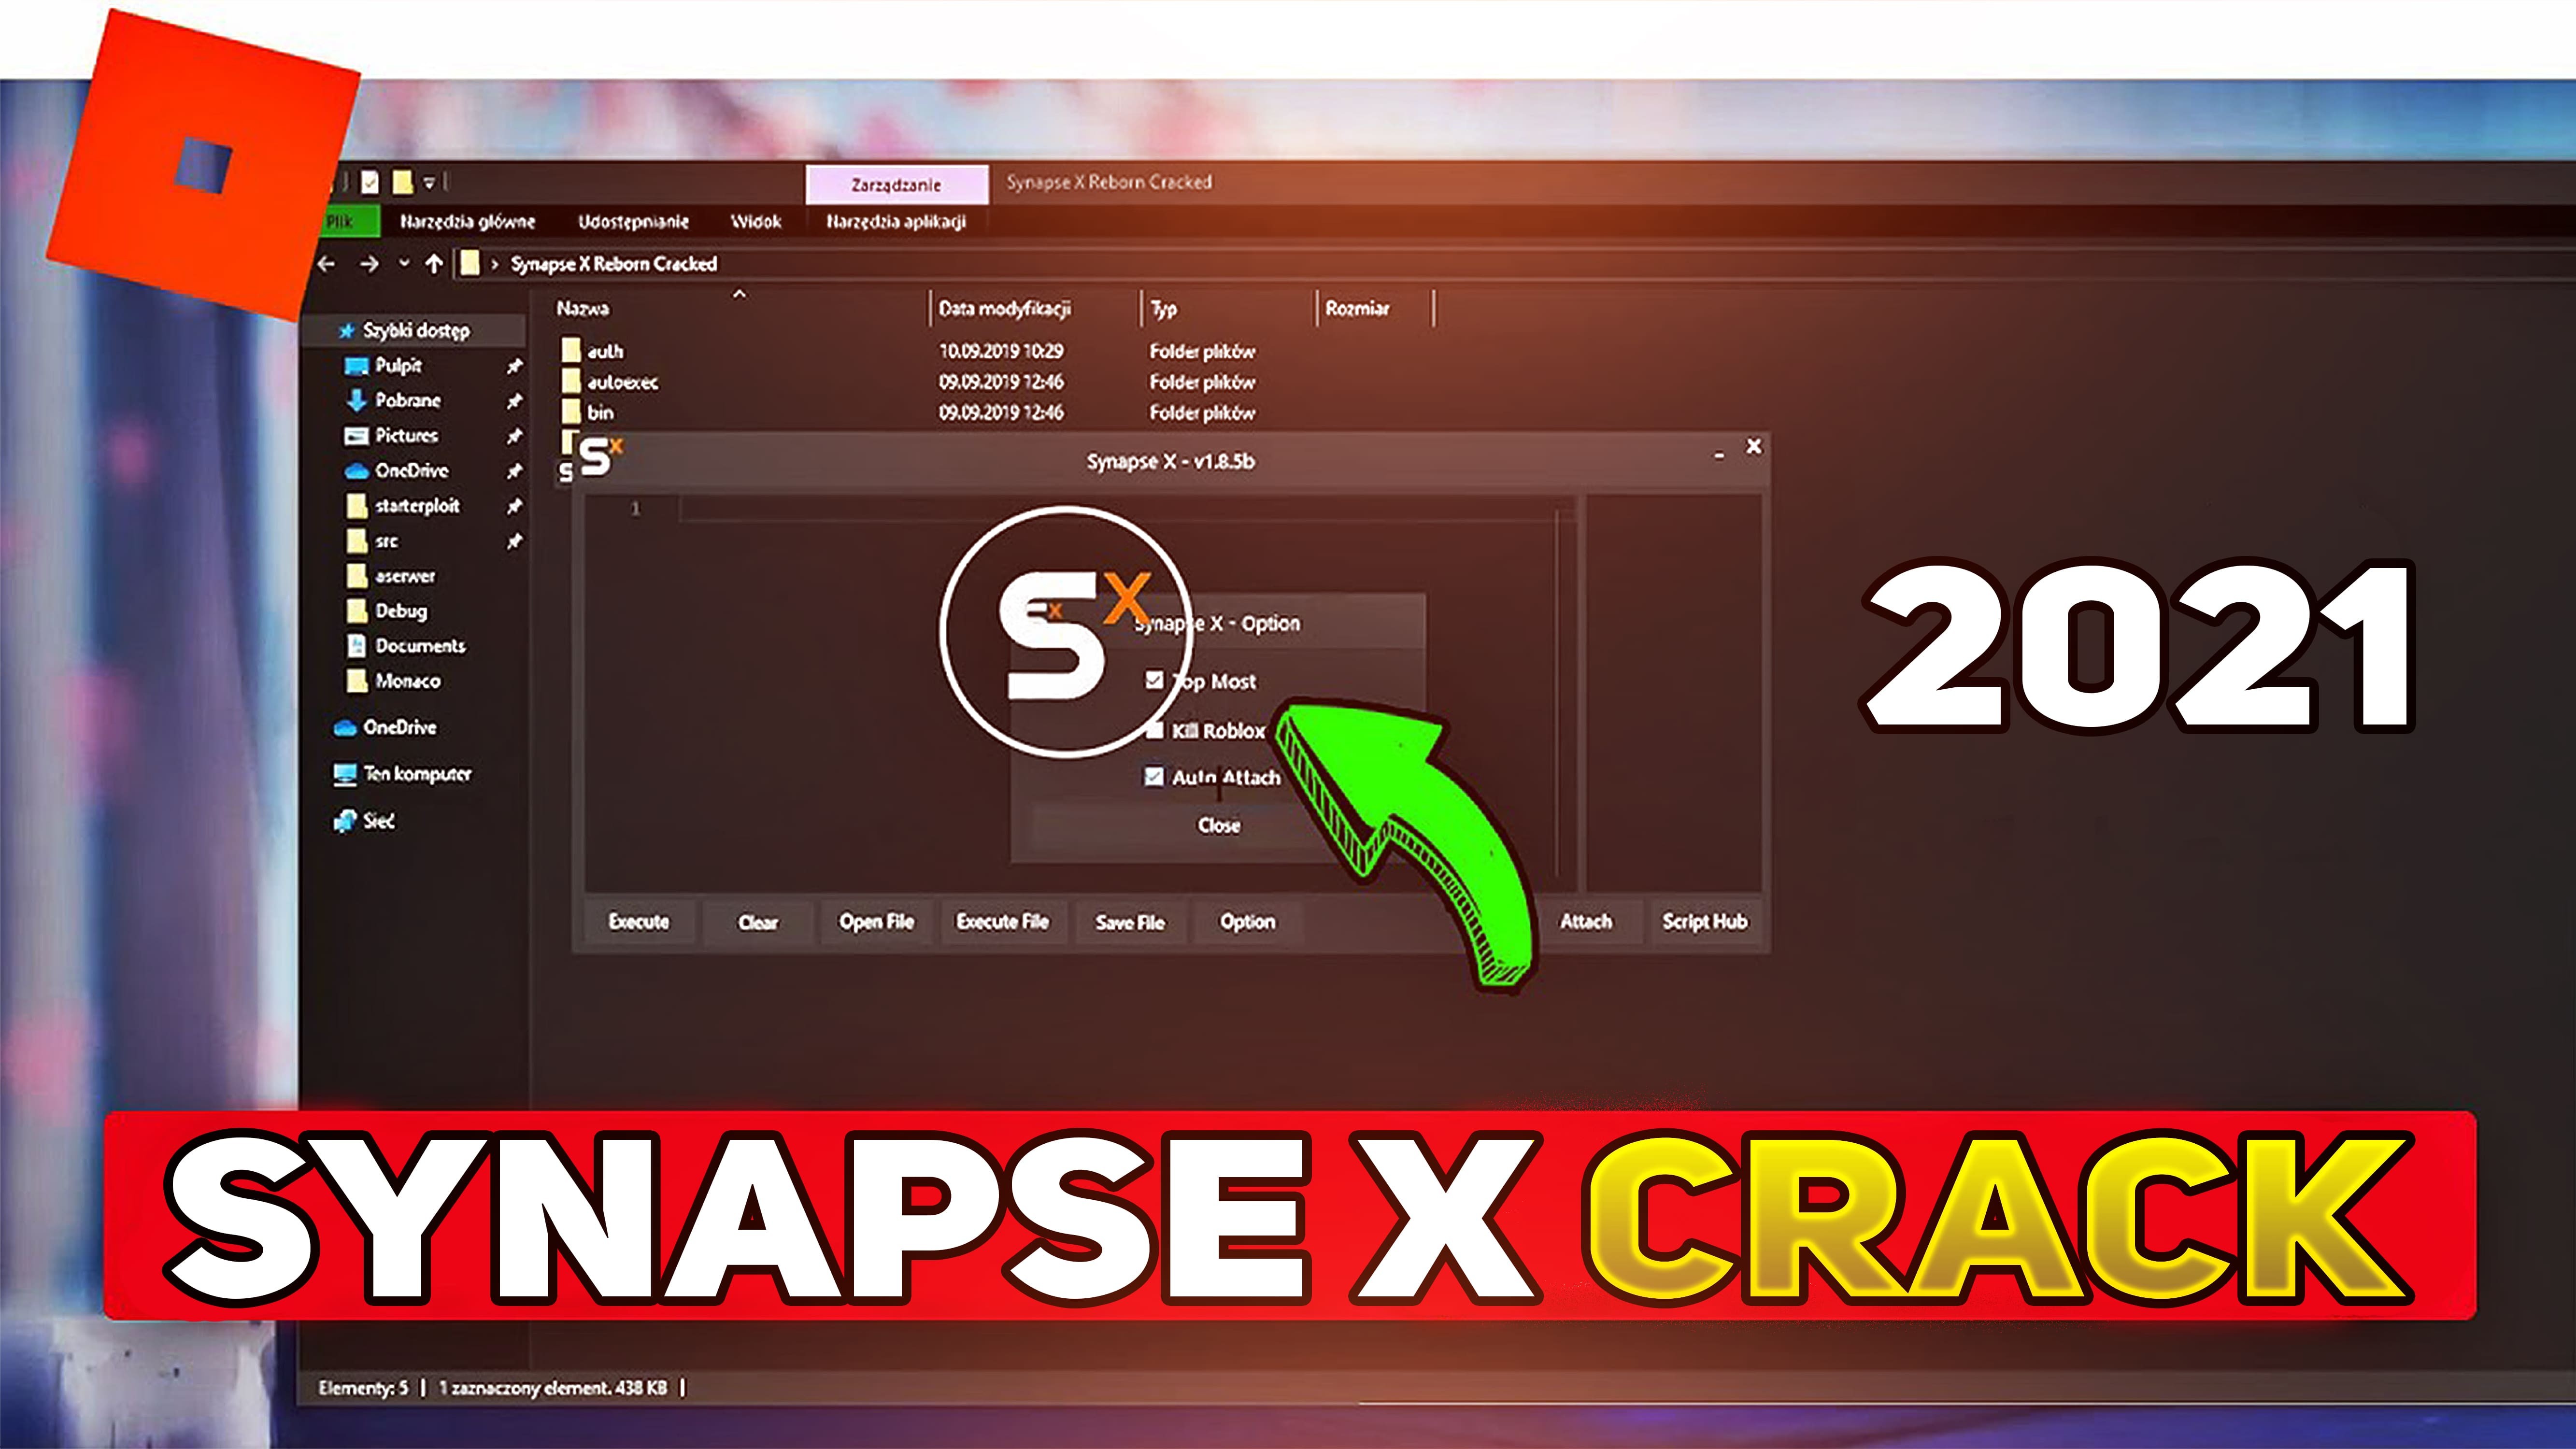 Roblox Synapse X Cracked 2021 Teletype - synapse x crack roblox download